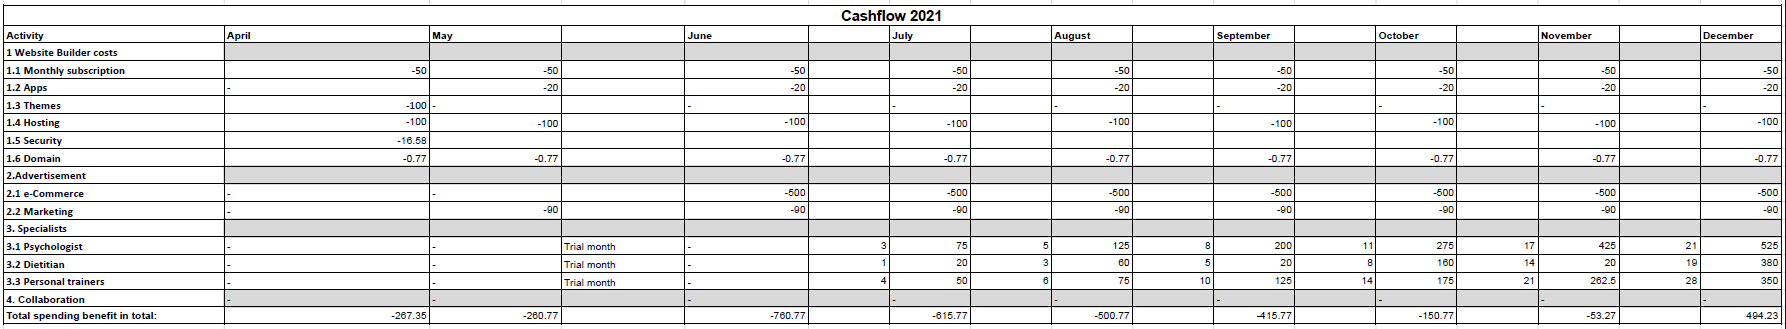 Cashflow overview.PNG